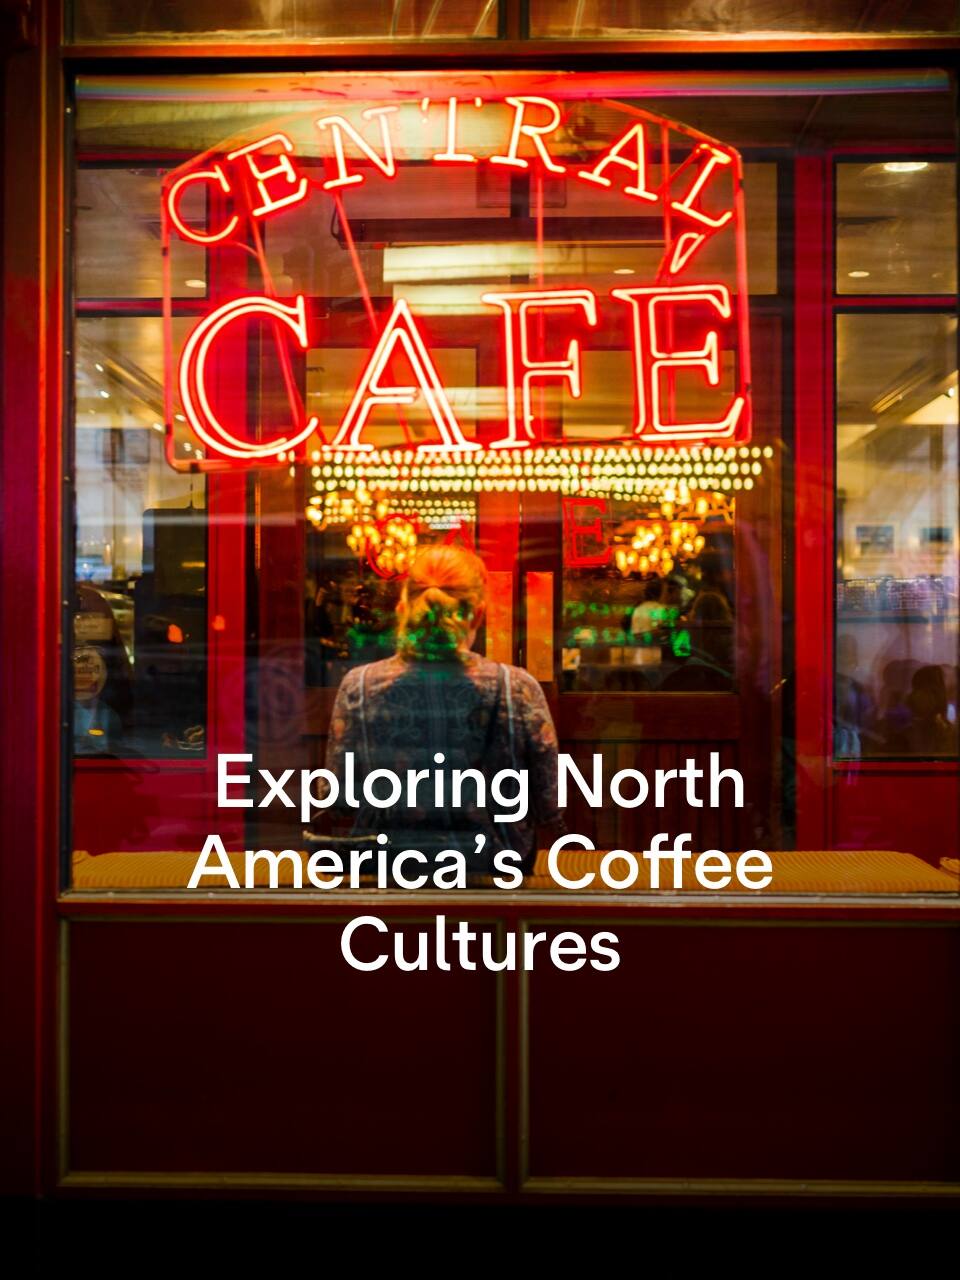 Coffee In America: Exploring North America’s Coffee Cultures - Coffe Lounge